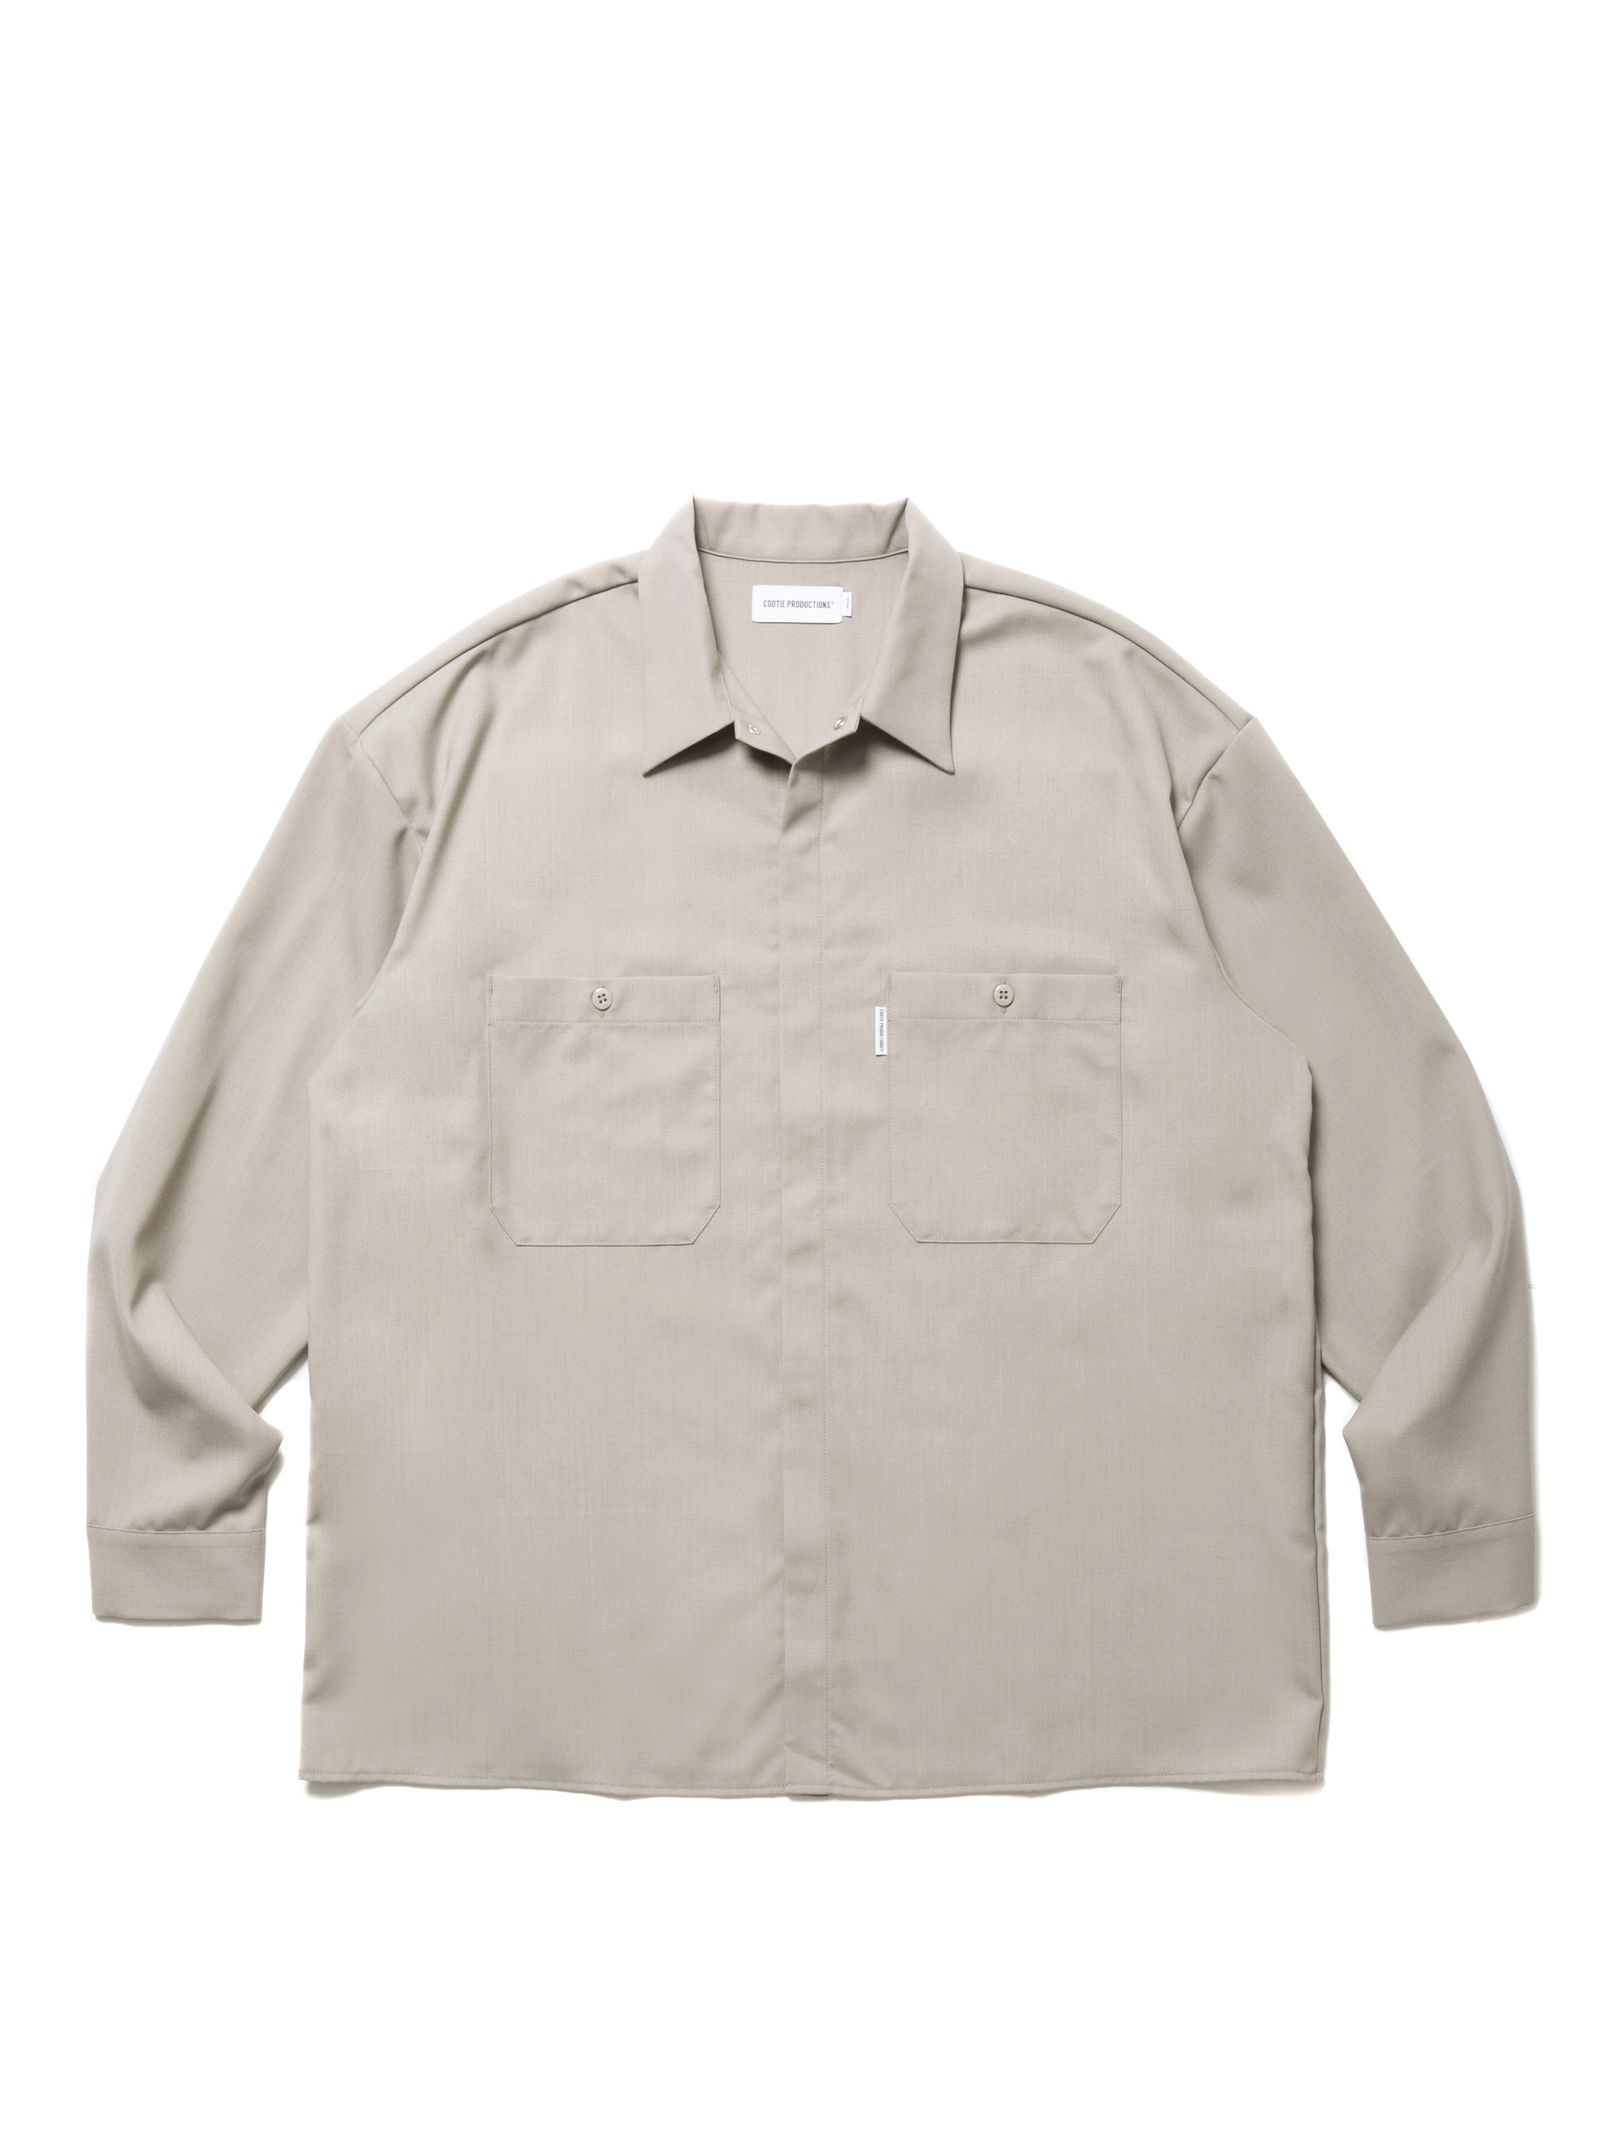 COOTIE PRODUCTIONS - T/W Fly Front Work L/S Shirt (TAUPE 